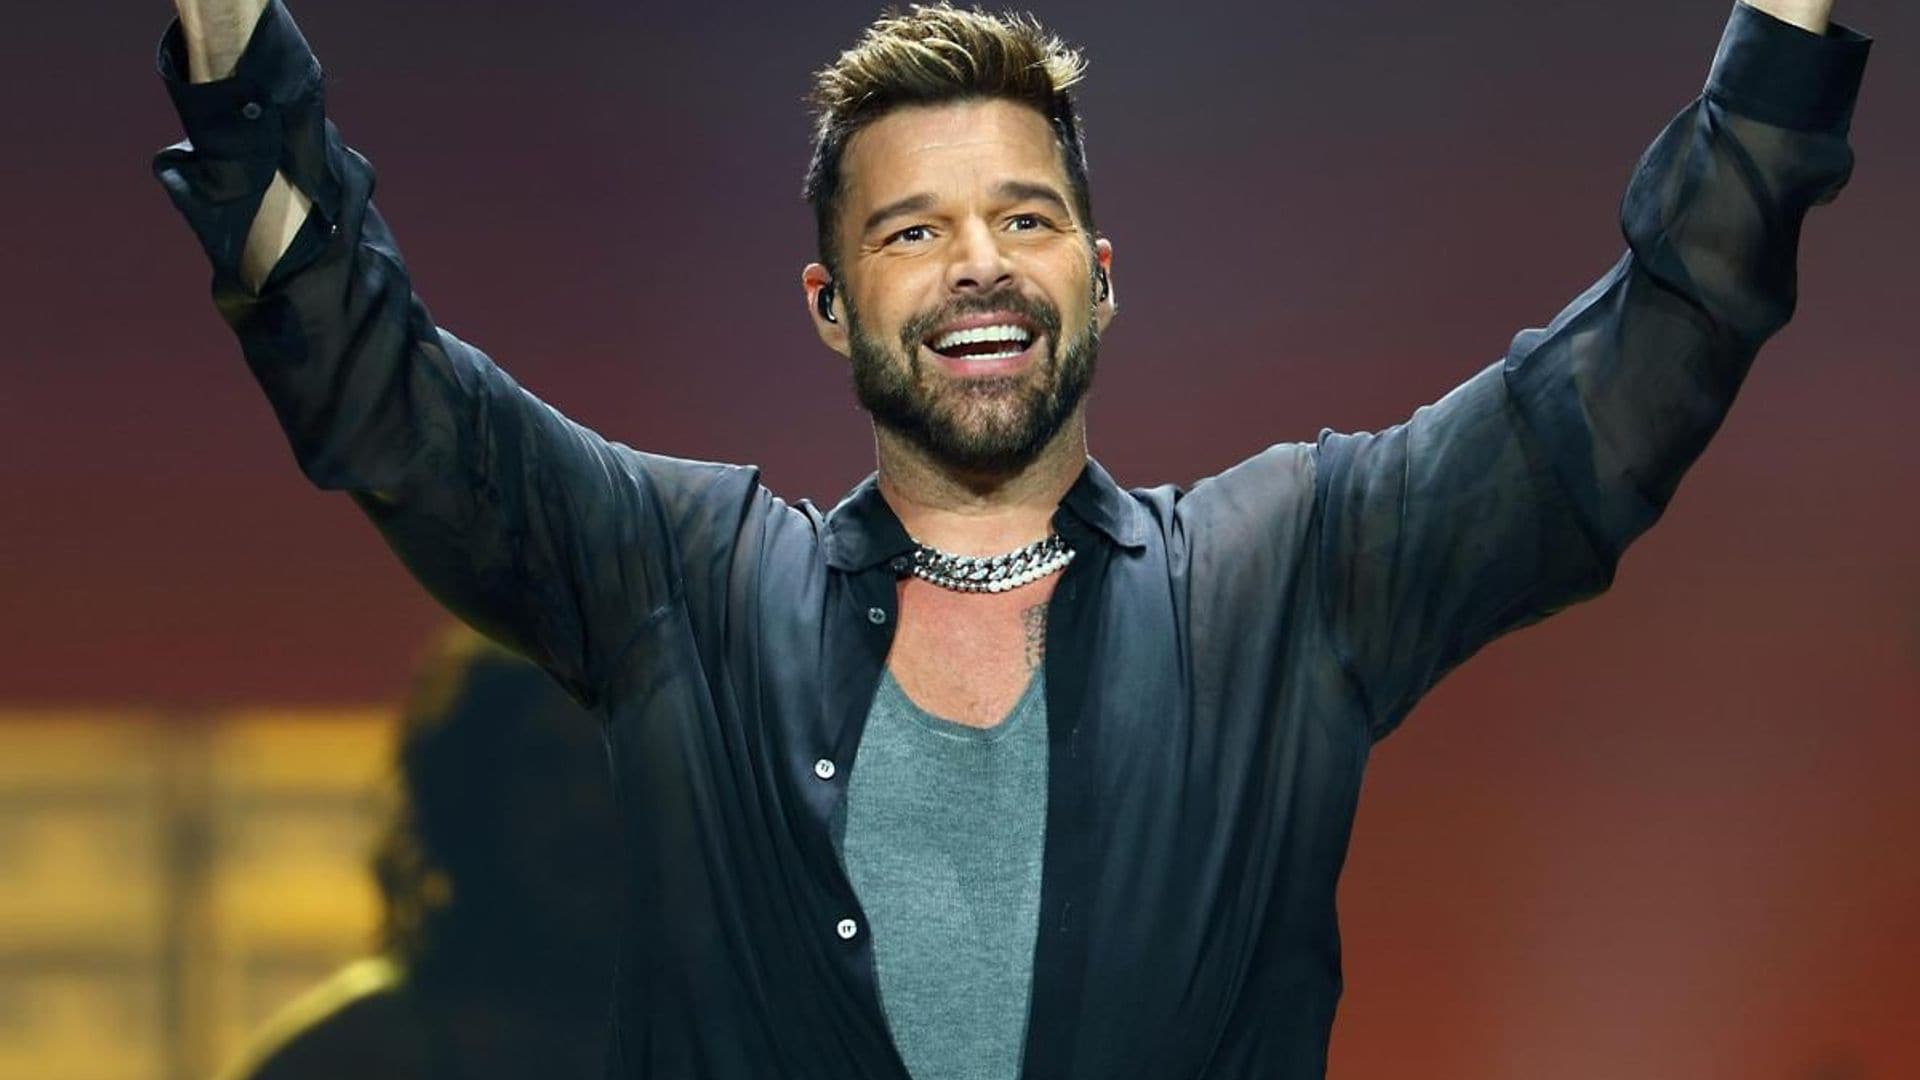 Ricky Martin to make history at LA Pride this summer: ‘I am thrilled to be headlining’